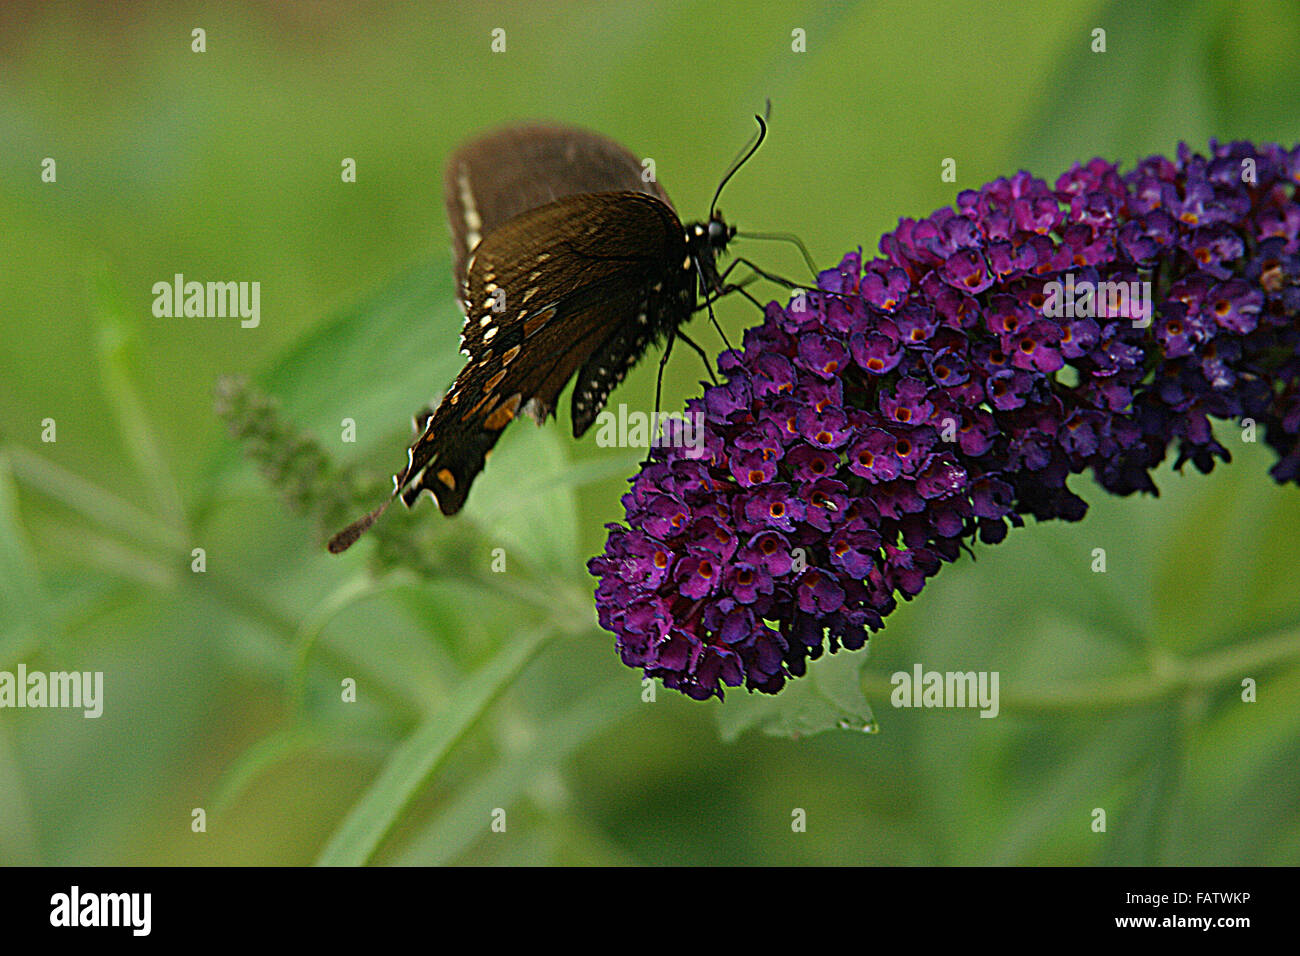 A butterfly alights on a purple butterfly bush (Buddleia davidii) and sometimes know as 'Black Night' in North Georgia, USA. Stock Photo